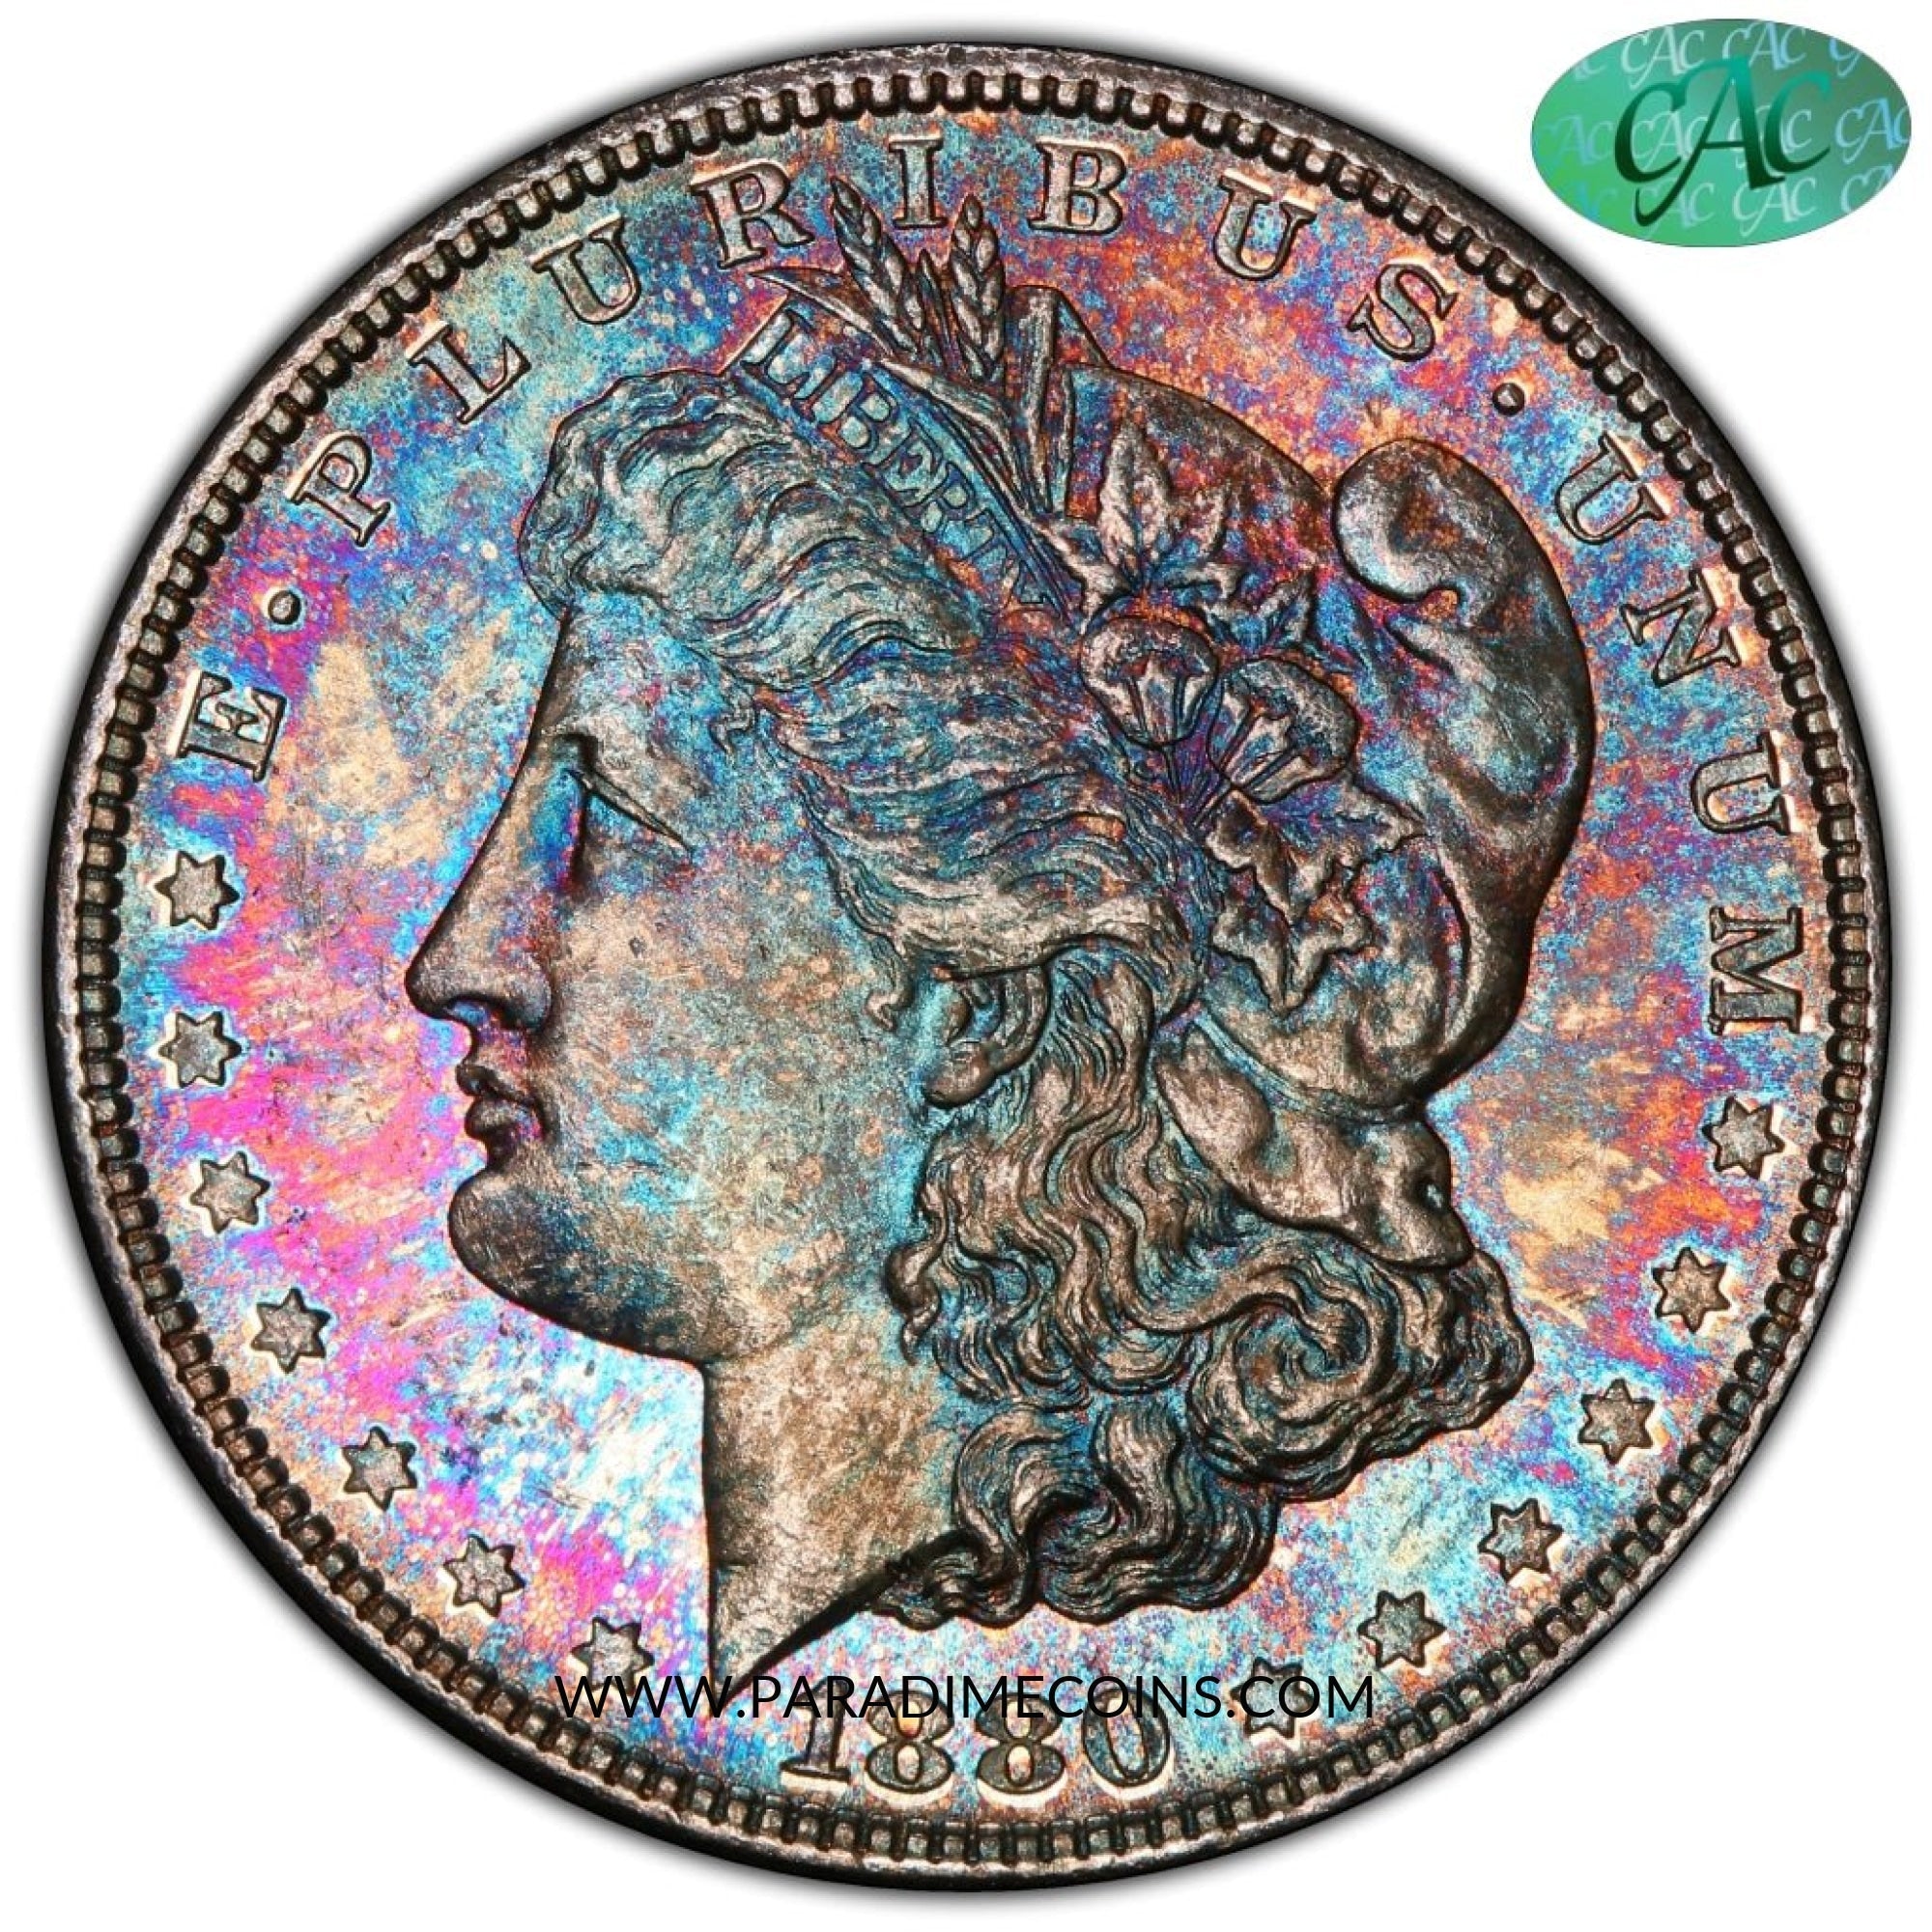 1880-S $1 MS63 PCGS CAC - Paradime Coins | PCGS NGC CACG CAC Rare US Numismatic Coins For Sale